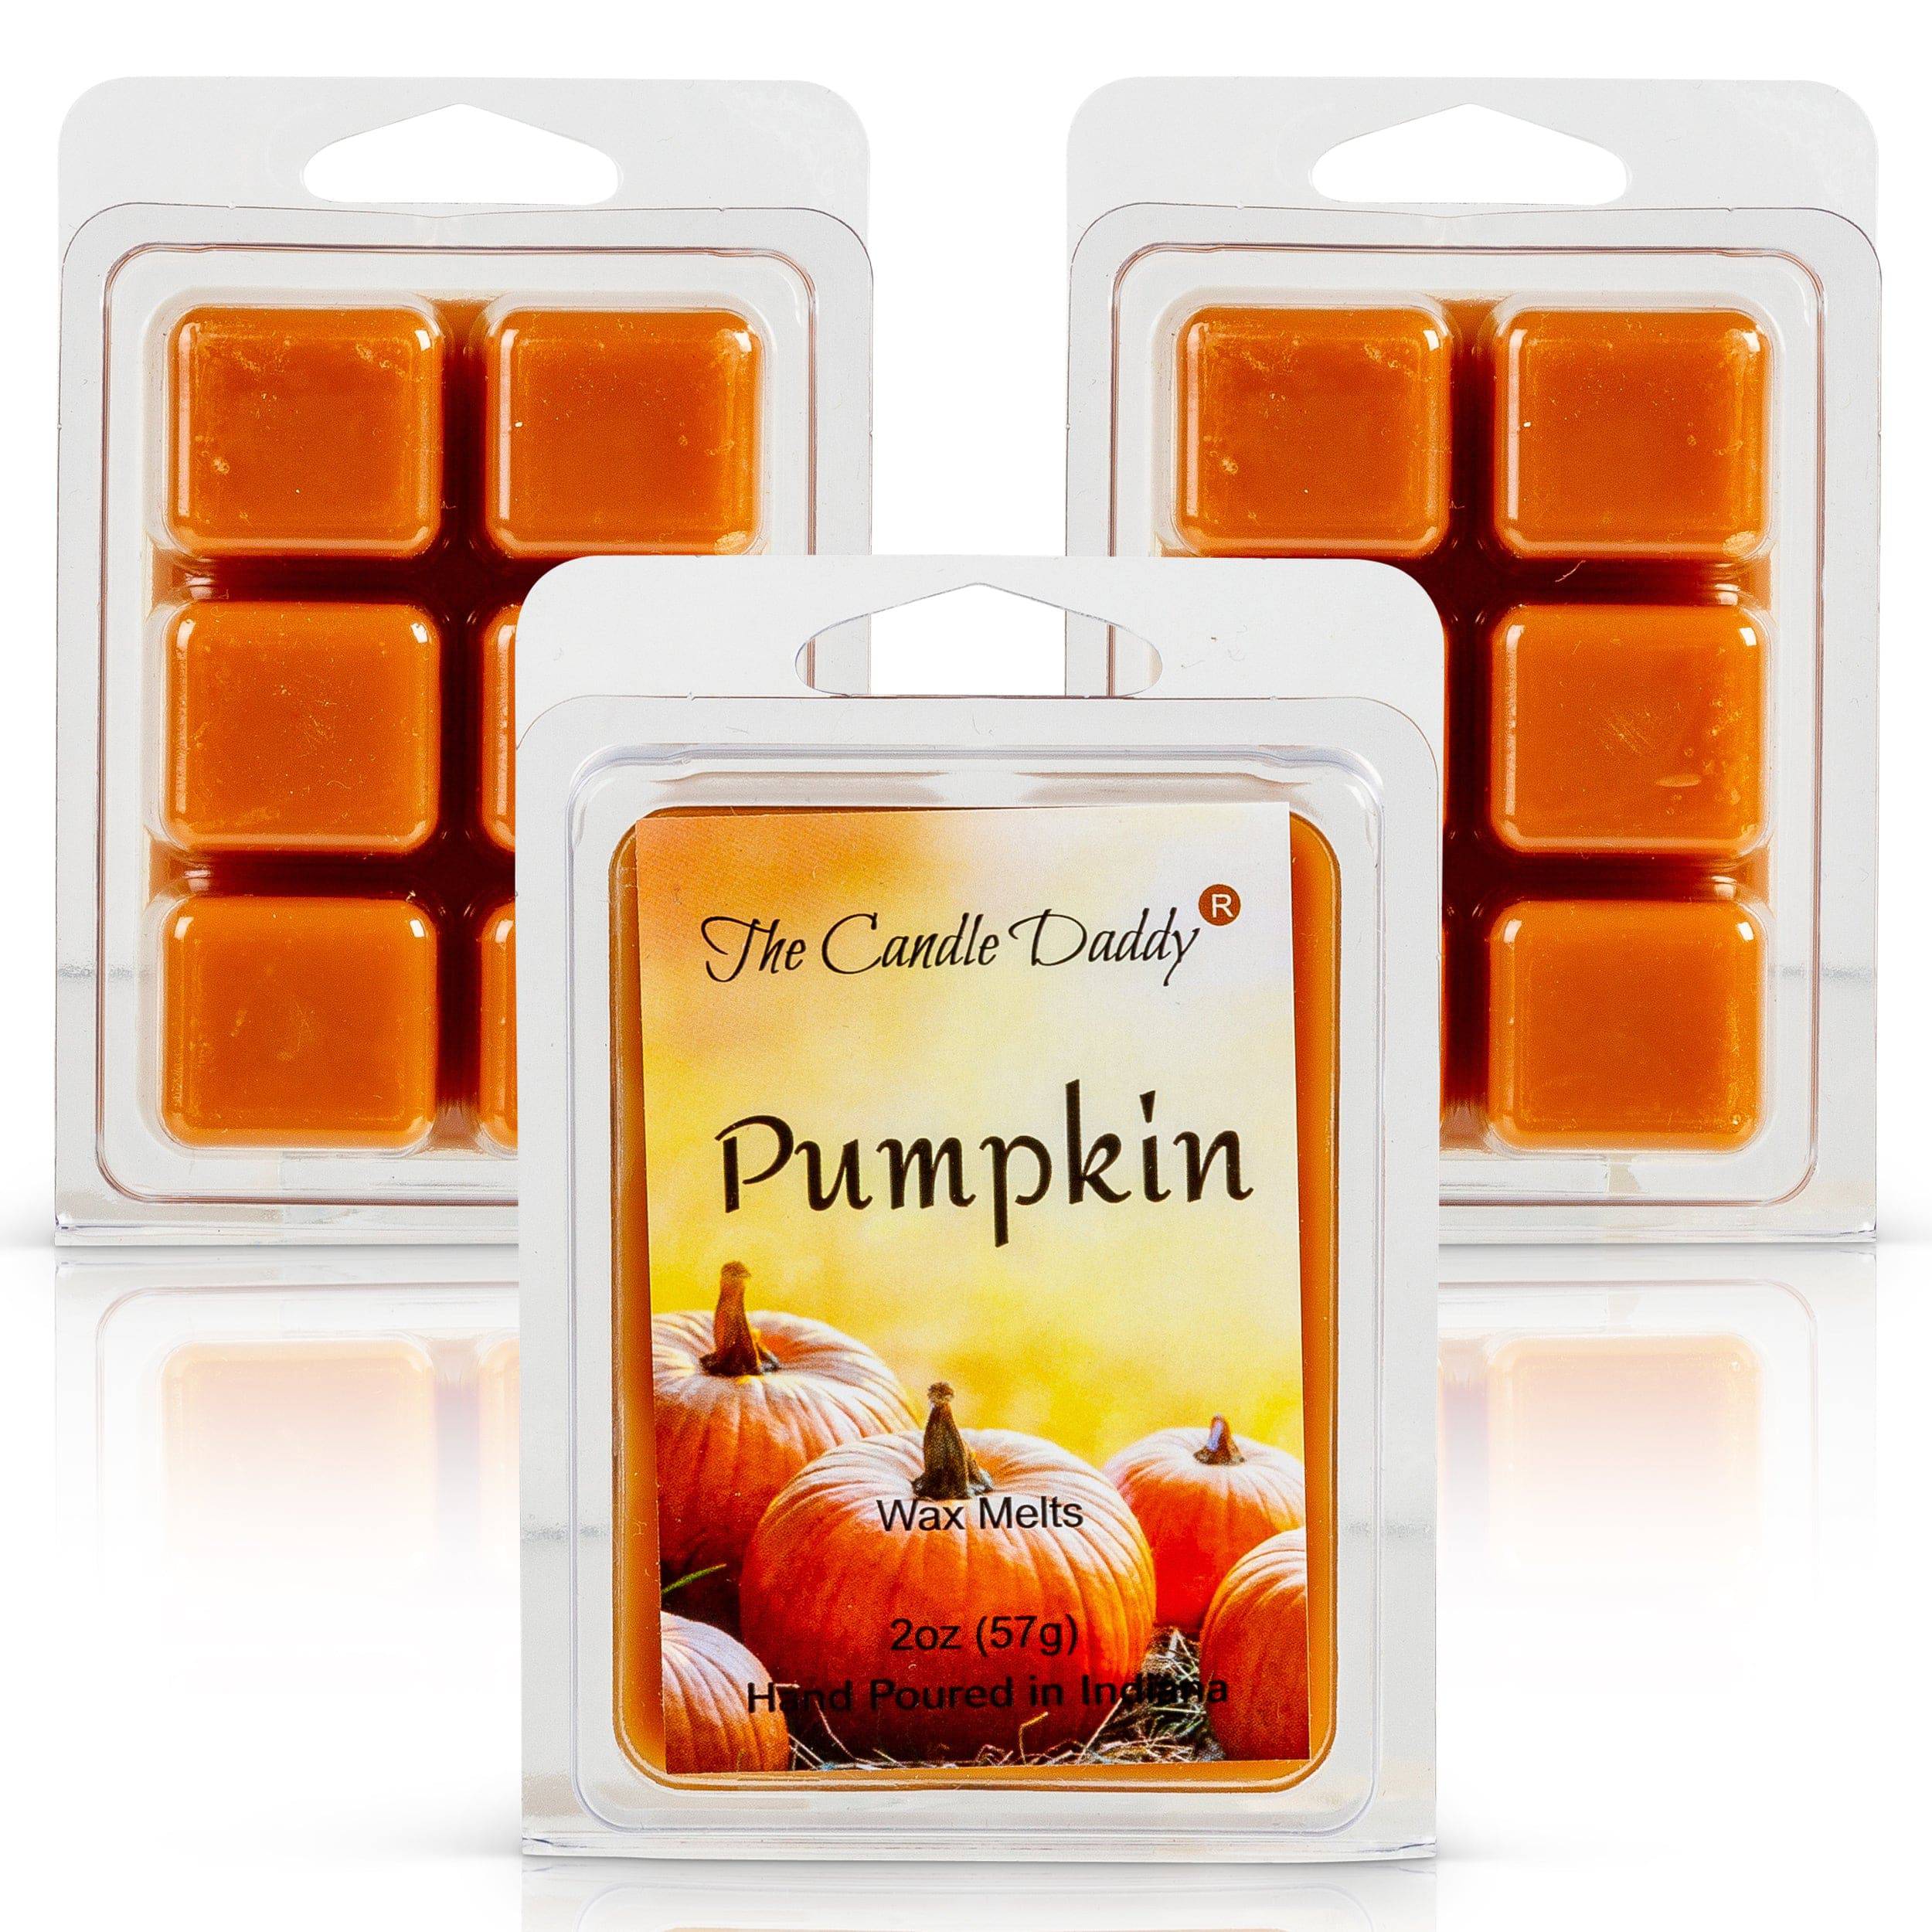 Happy Wax Spicy Pumpkin Scented Soy Wax Melts Collection 6 Oz. of